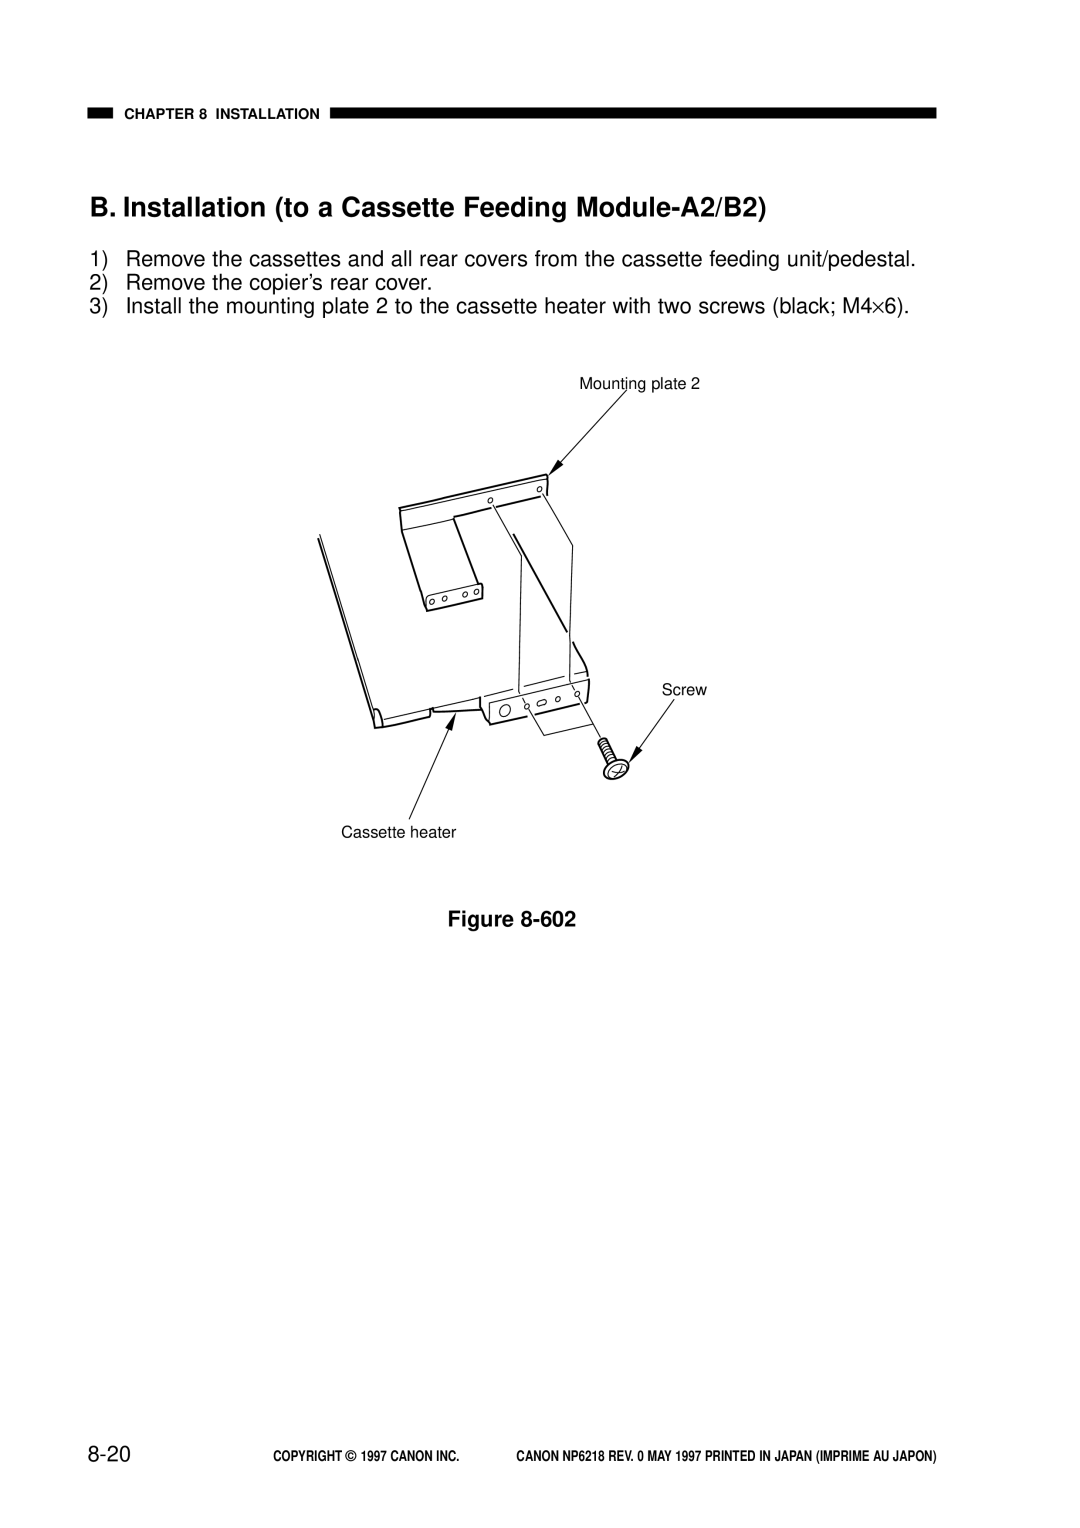 Canon NP6218, FY8-13EX-000 service manual B. Installation to a Cassette Feeding Module-A2/B2, 8-20 